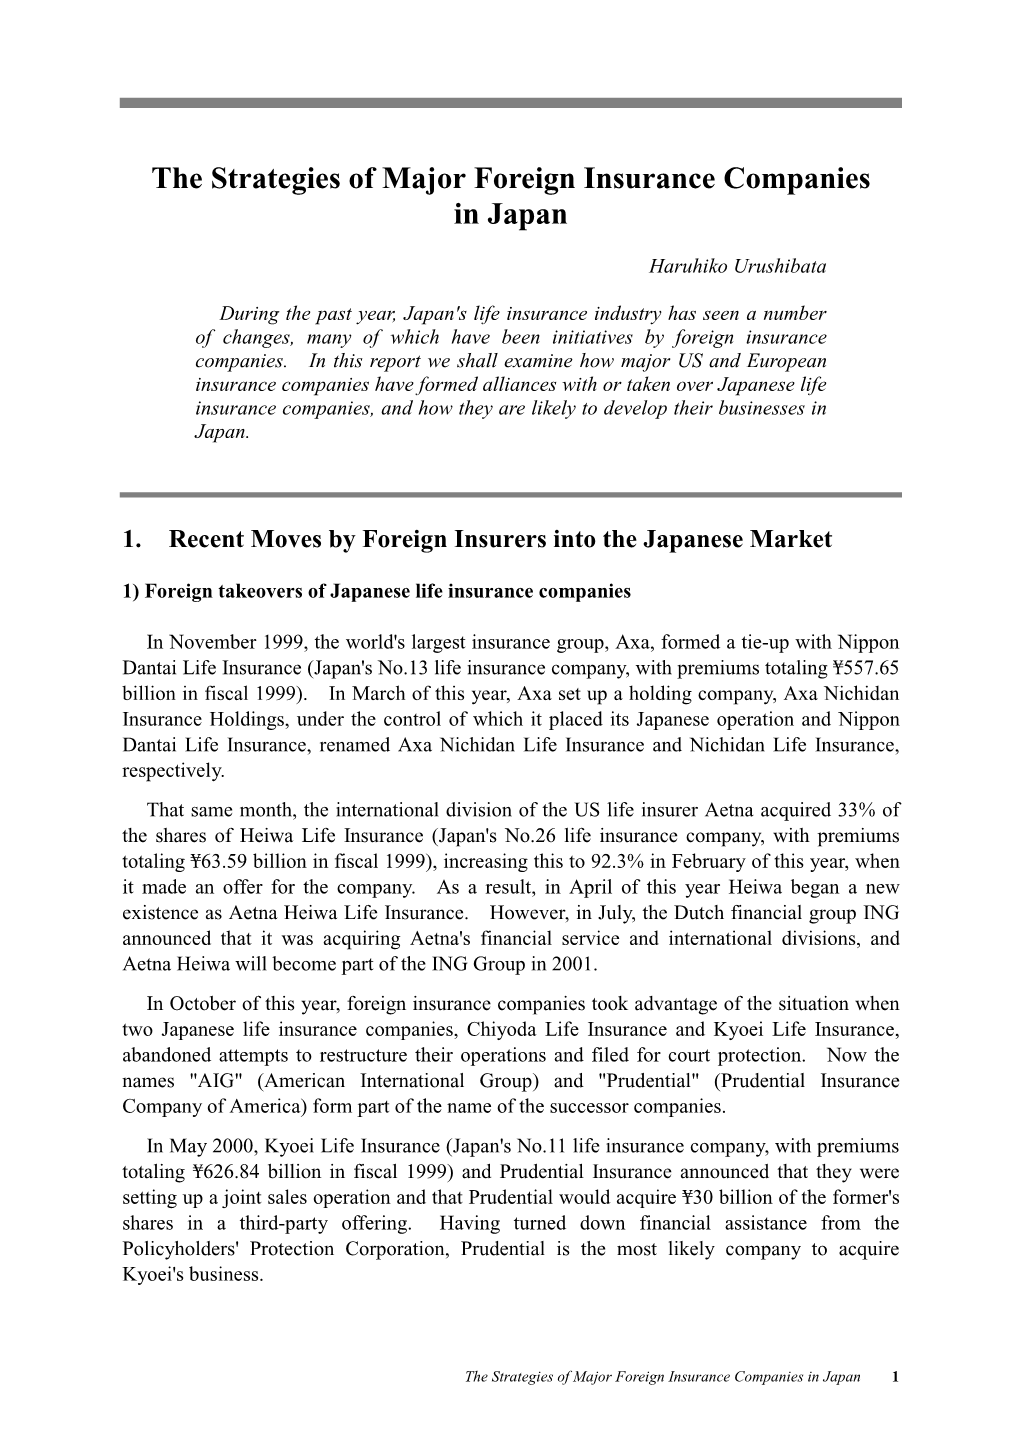 The Strategies of Major Foreign Insurance Companies in Japan (PDF)